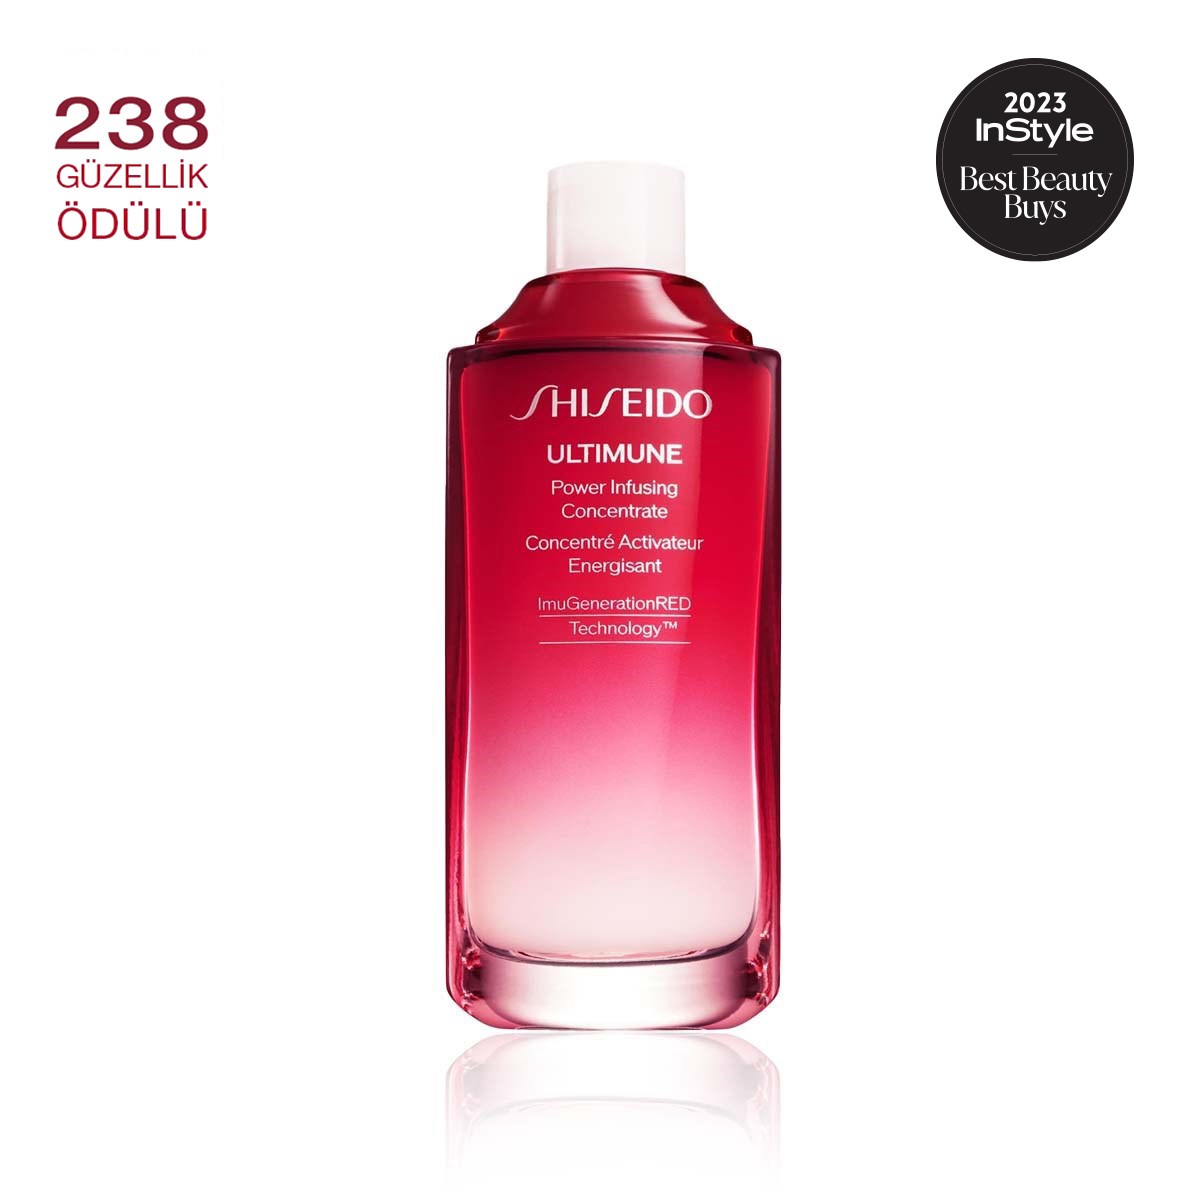 ULTIMUNE POWER INFUSING CONCENTRATE - 75ML - REFILL